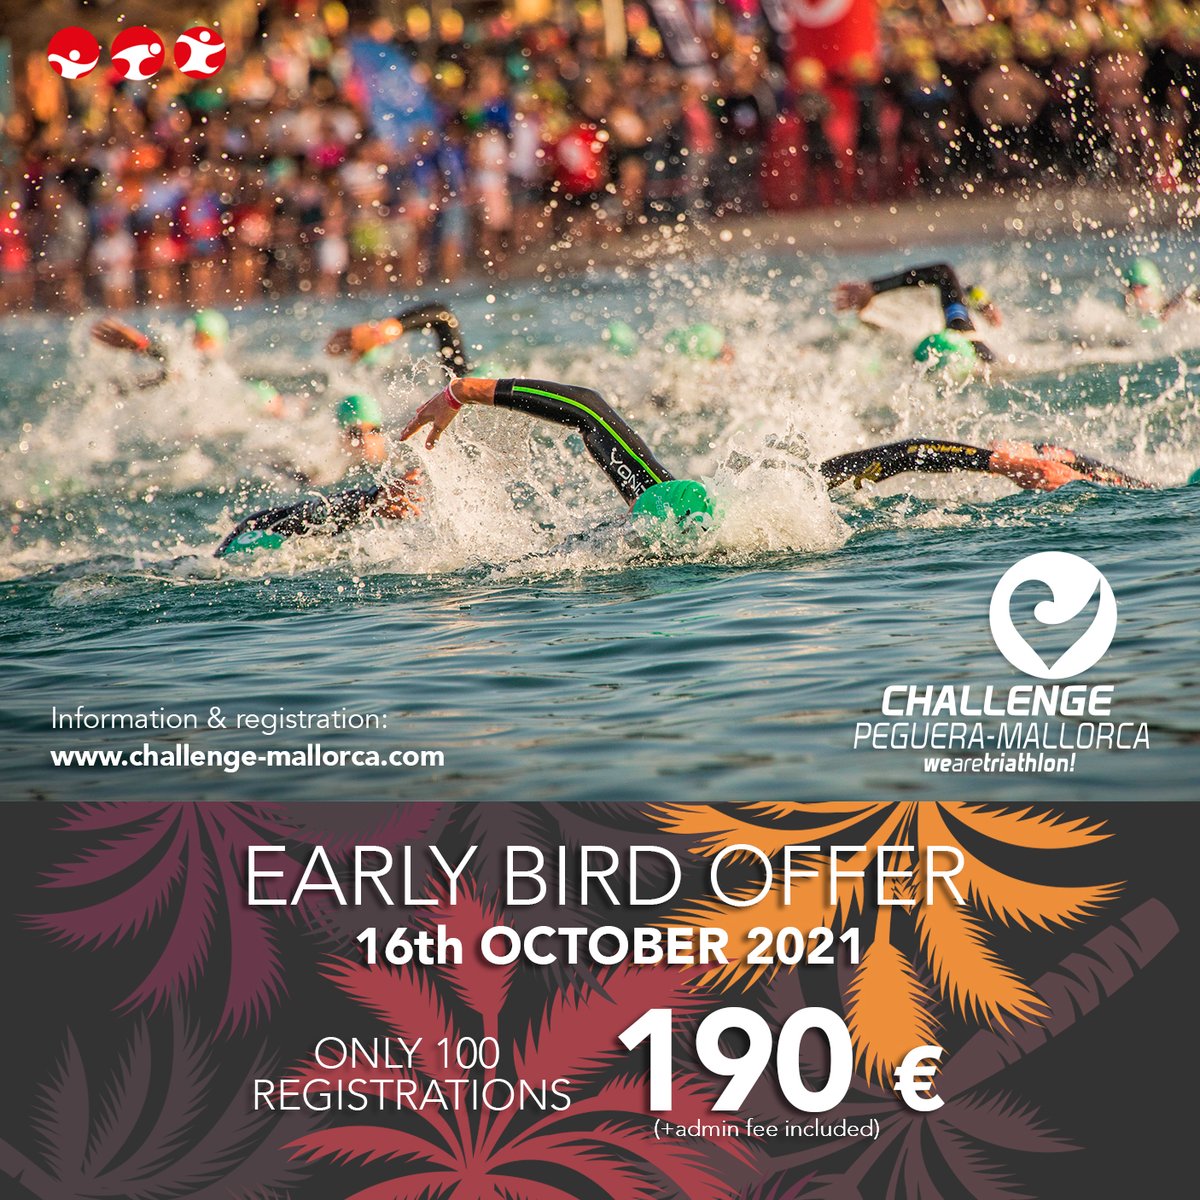 ✴️OOOOOEEEE!✴️ 👉CHMALLORCA 2021 REGISTRATIONS ARE NOW OPEN!. SAVE THE DATE: 16th of october 2021 #CHMALLORCA21 ❌EARLY BIRD registrations, ONLY 100 SLOTS at the BEST price of 190 € (Admin fees included).❌ More info: challenge-mallorca.com/challenge-midd… #allabouttheathlete #chfamily